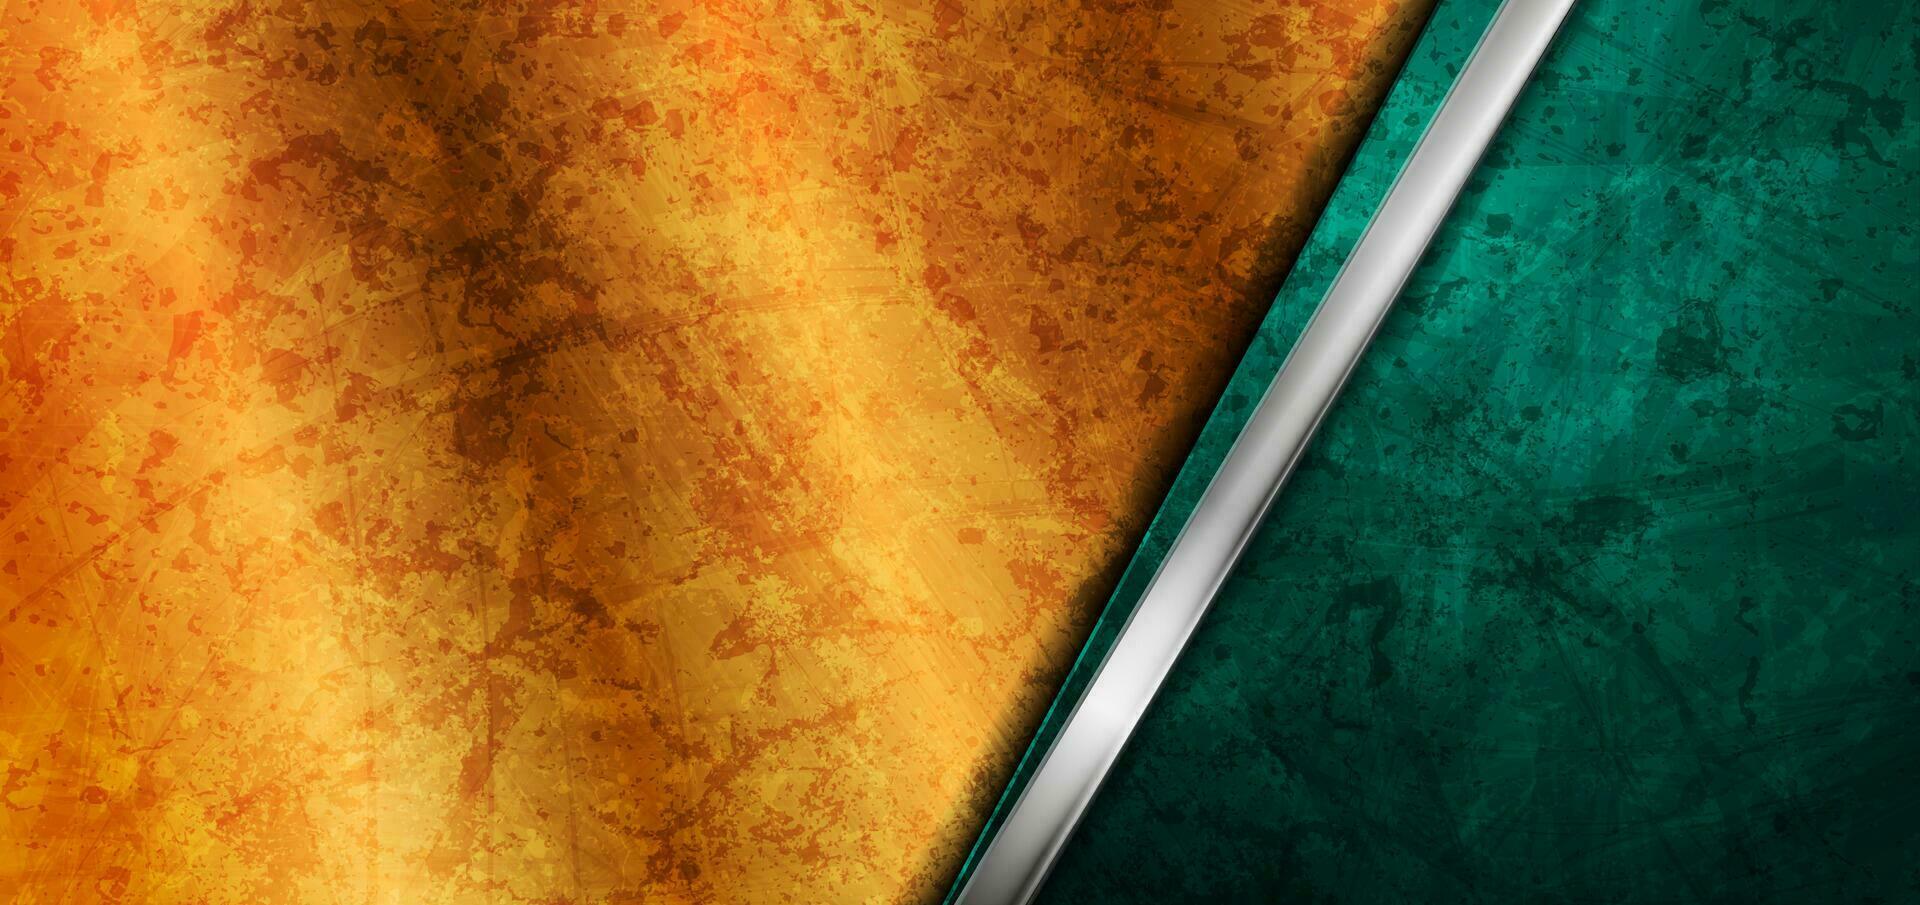 Green and golden grunge abstract background with metallic stripe vector